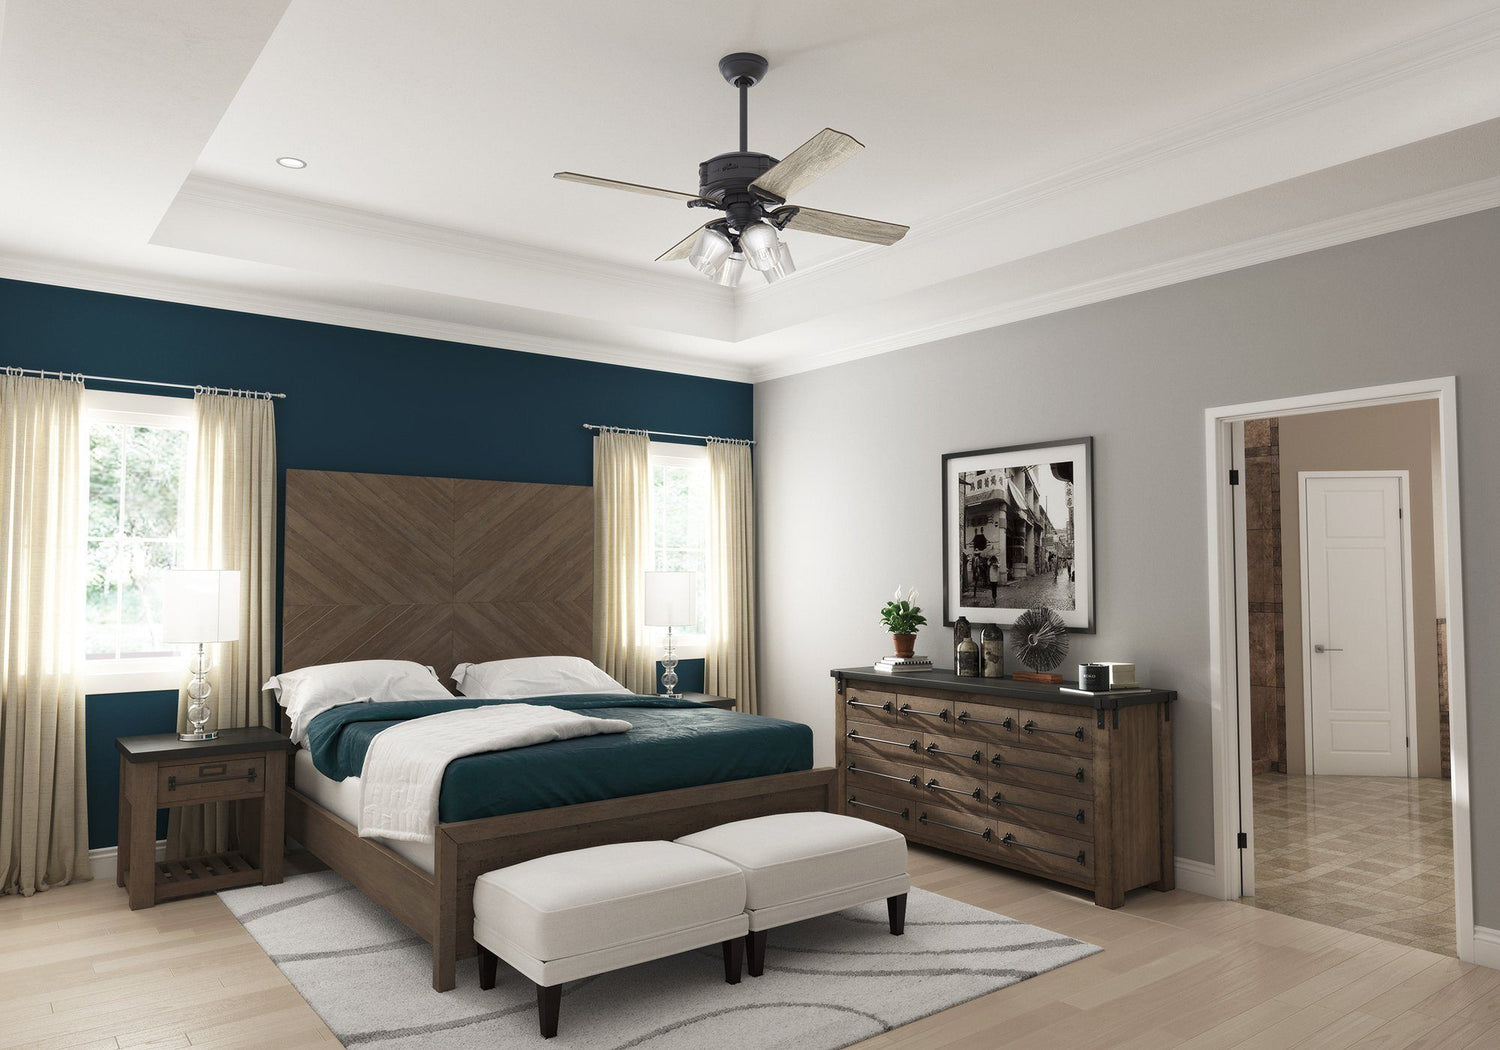 Guest bedroom ideas to impress your visitors